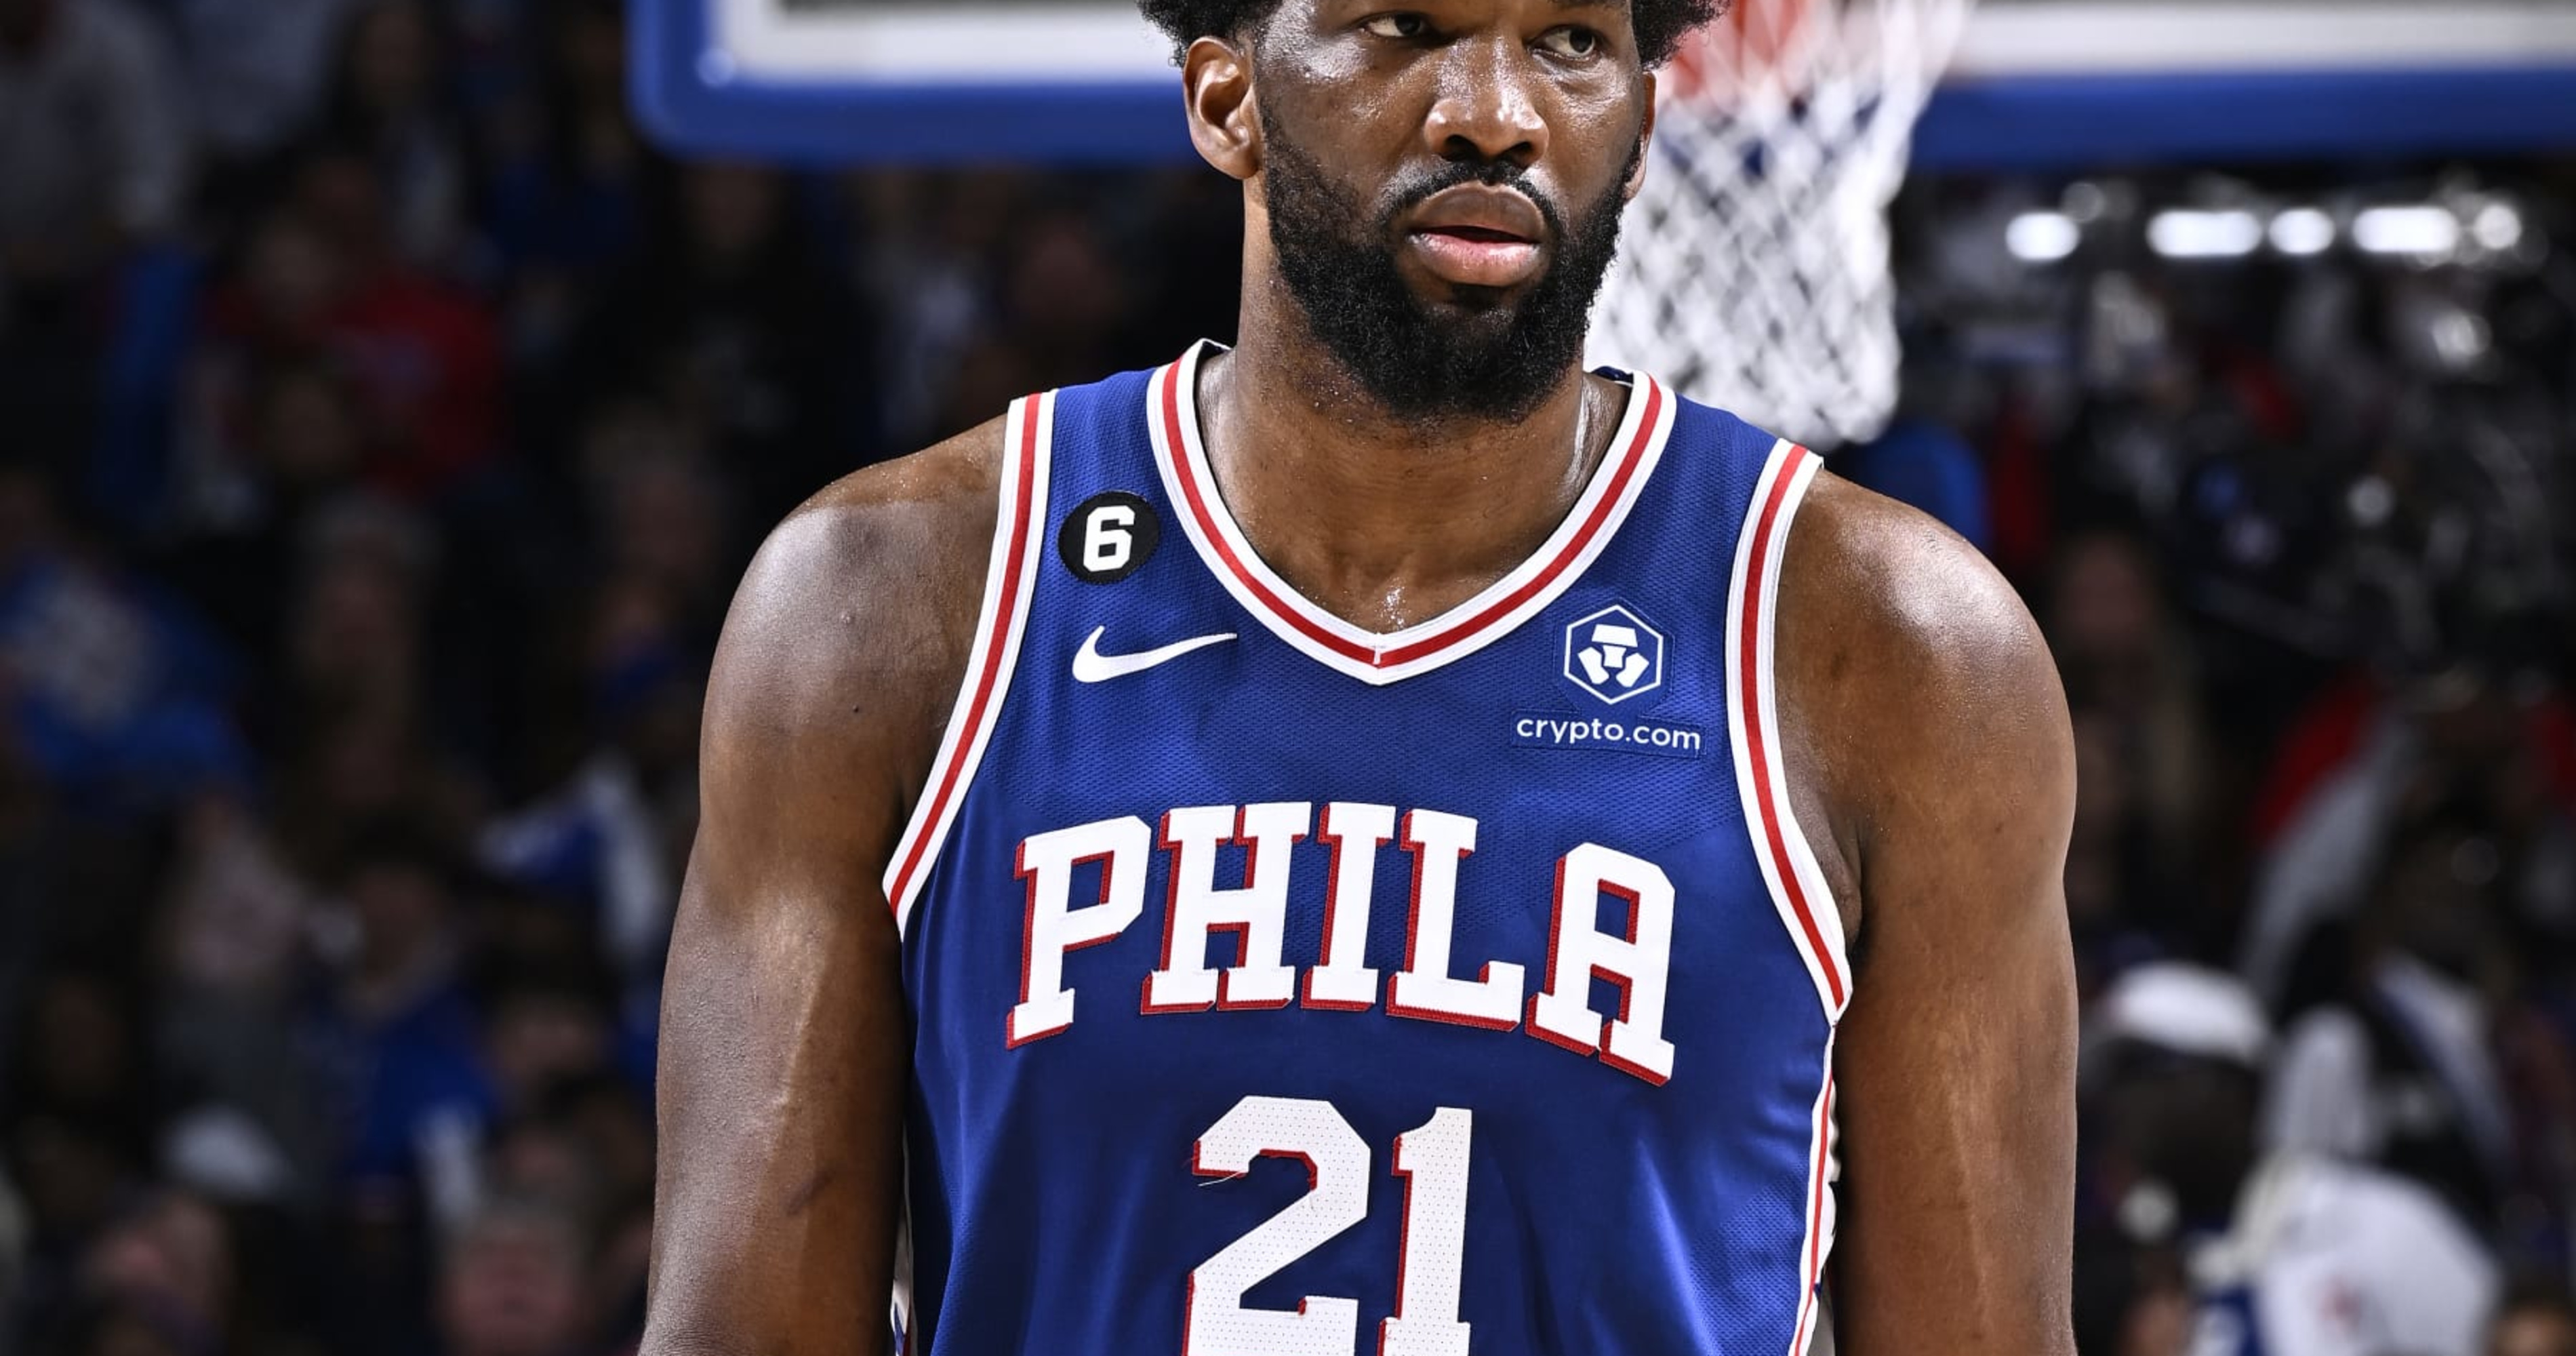 Report 76ers' Joel Embiid Has LCL Sprain, Could Wear Brace to Manage